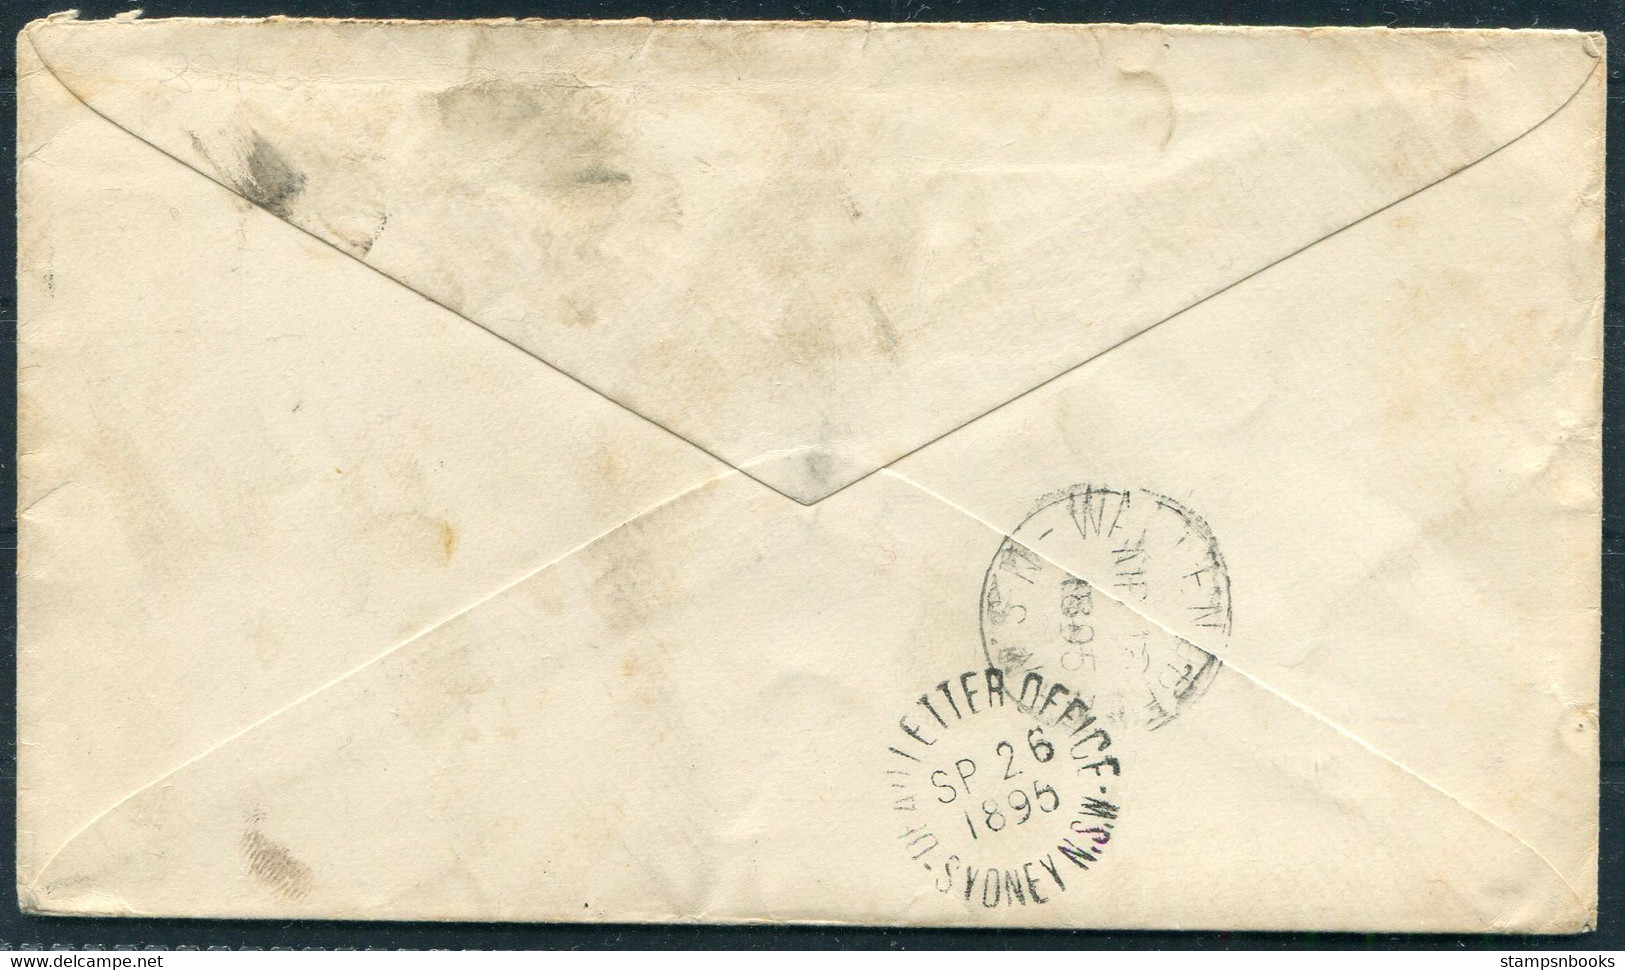 1895 Australia, New South Wales Stationery Cover Sydney - Wallendbeen "UNCLAIMED" Dead Letter Office D.L.O. - Covers & Documents